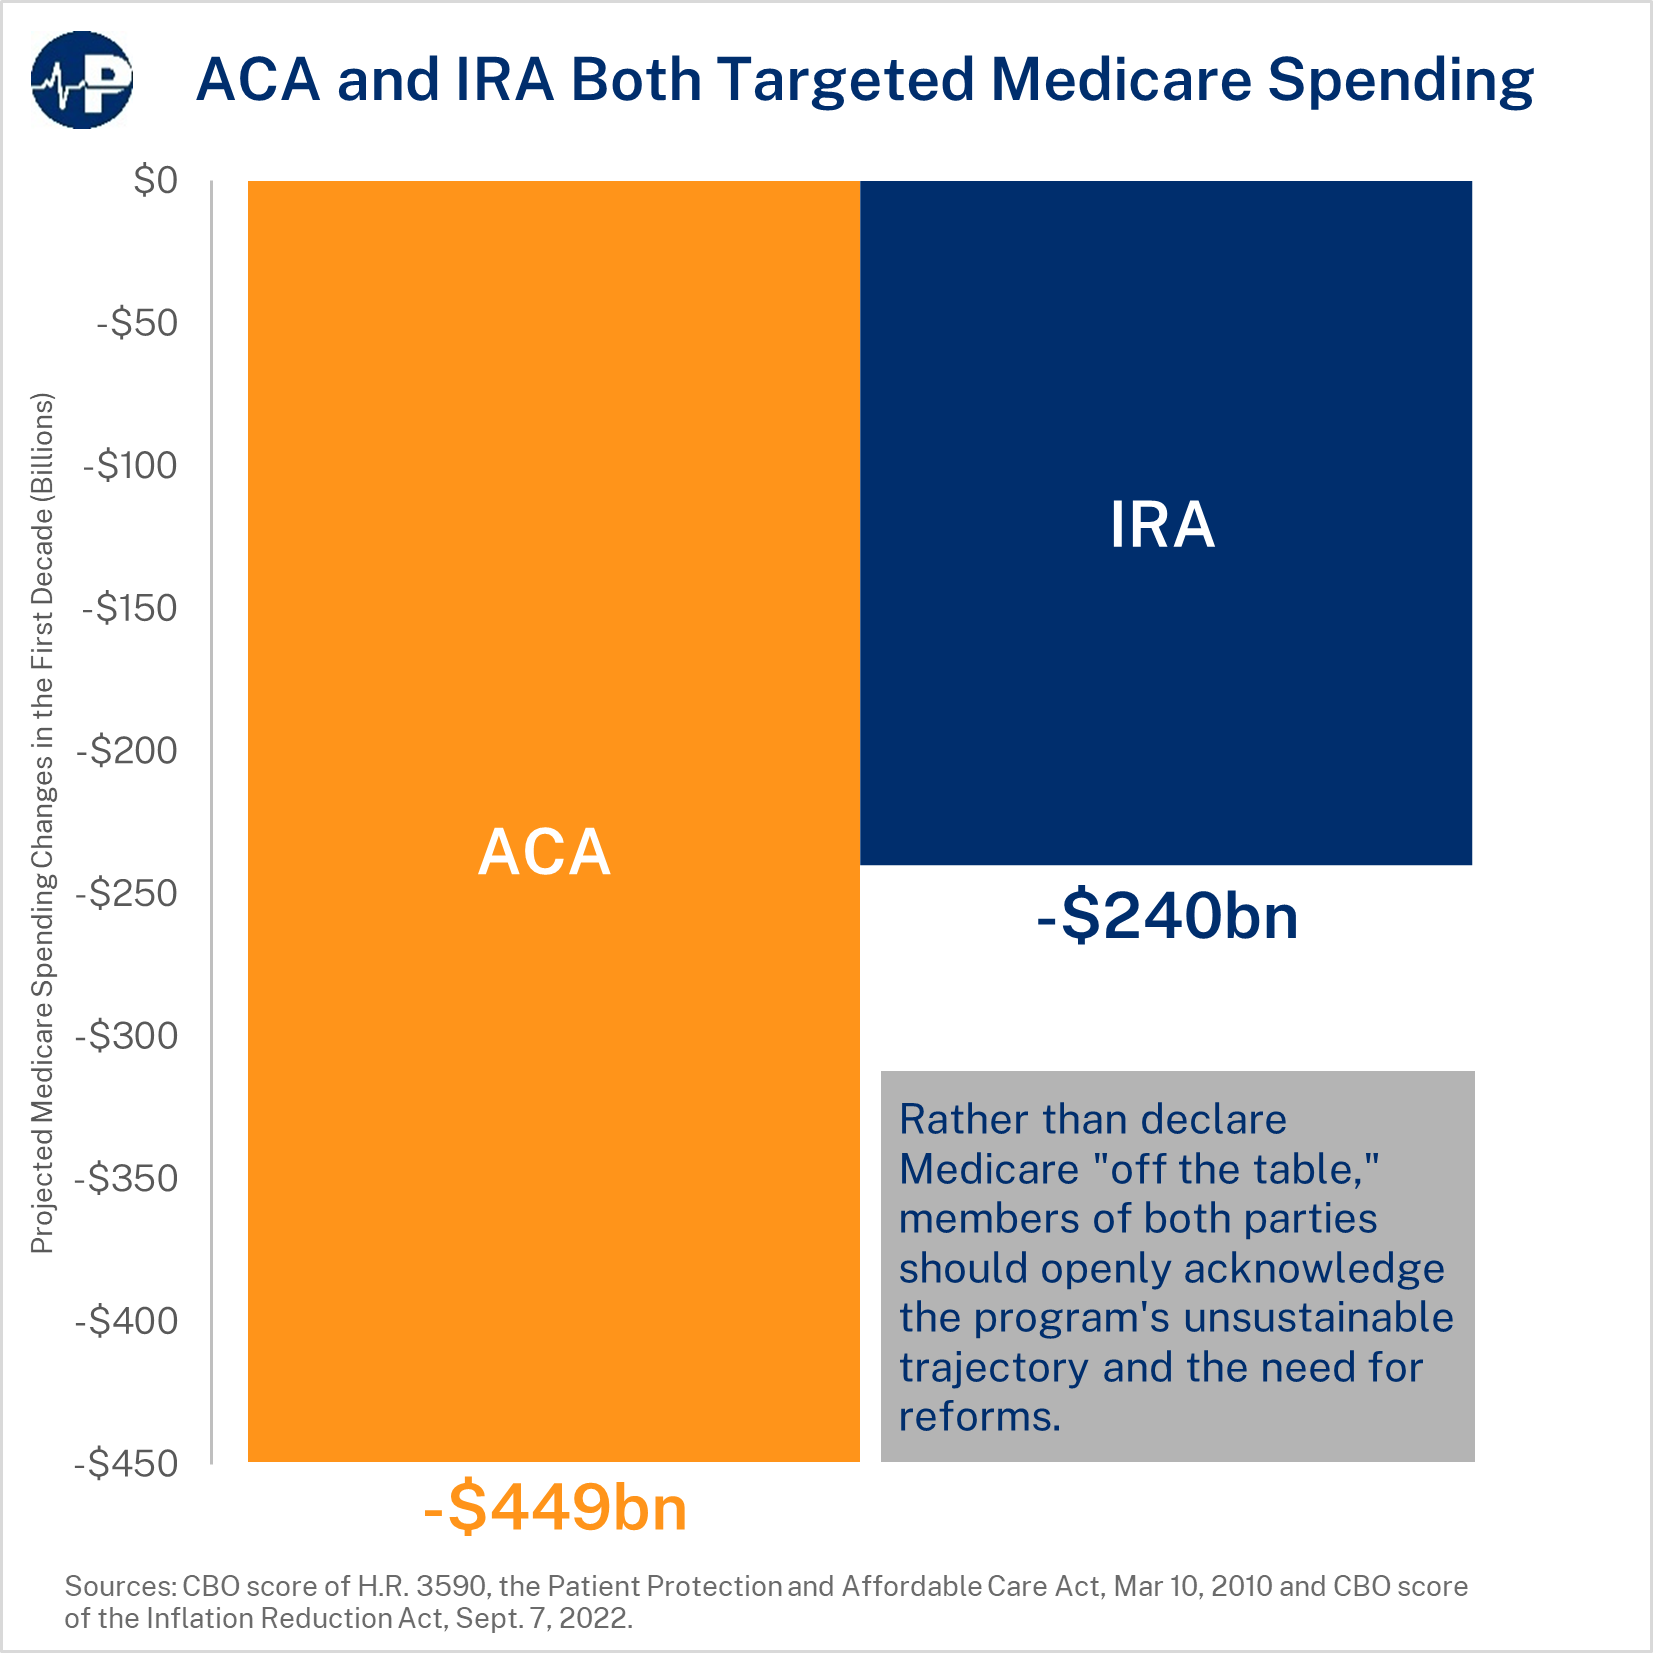 ACA and IRA Both Targeted Medicare Spending